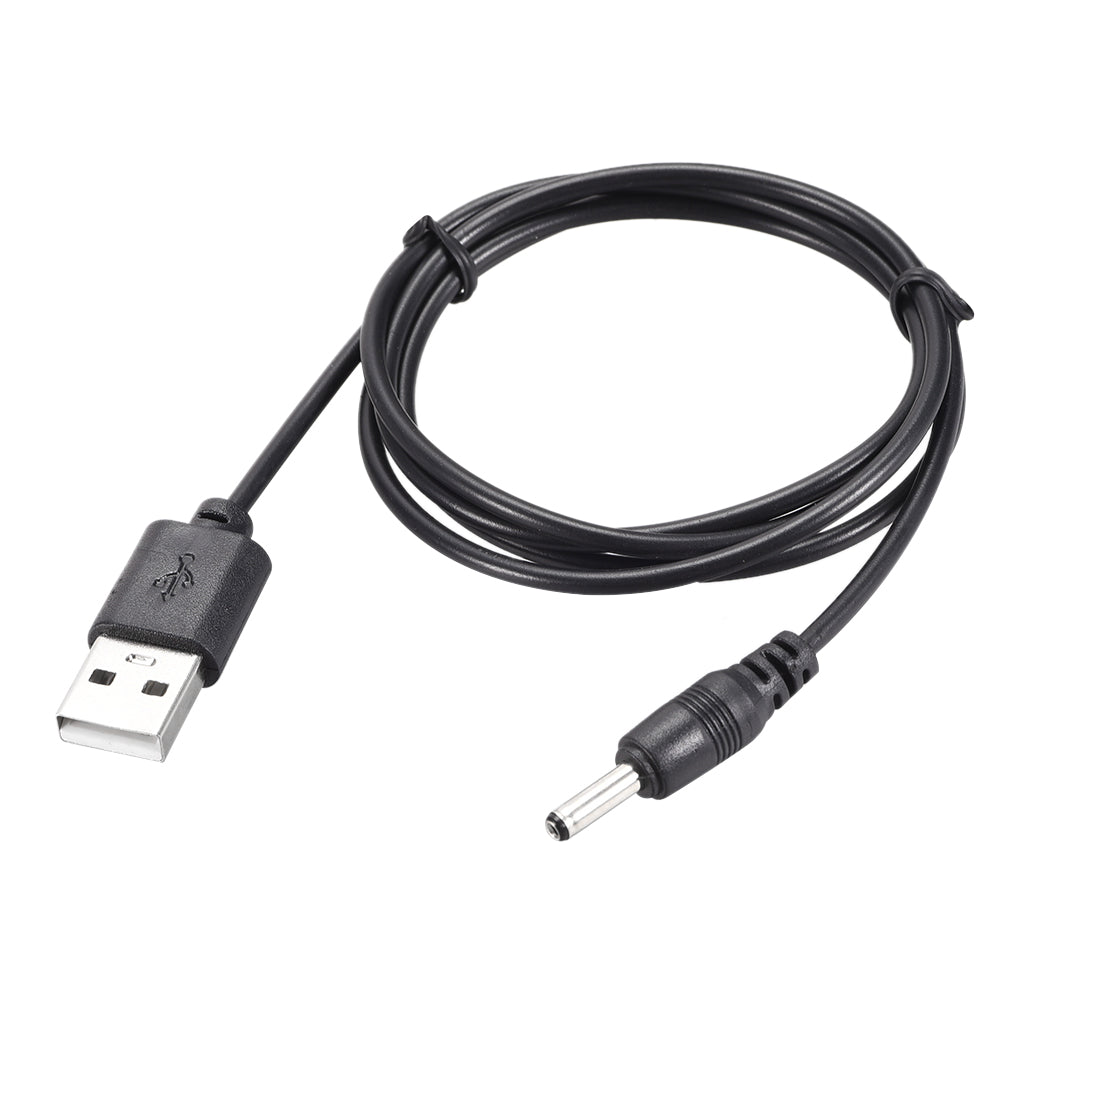 uxcell Uxcell 1M DC Male Power Supply 3.5 x 1.35mm Adapter to USB Plug Male Cable